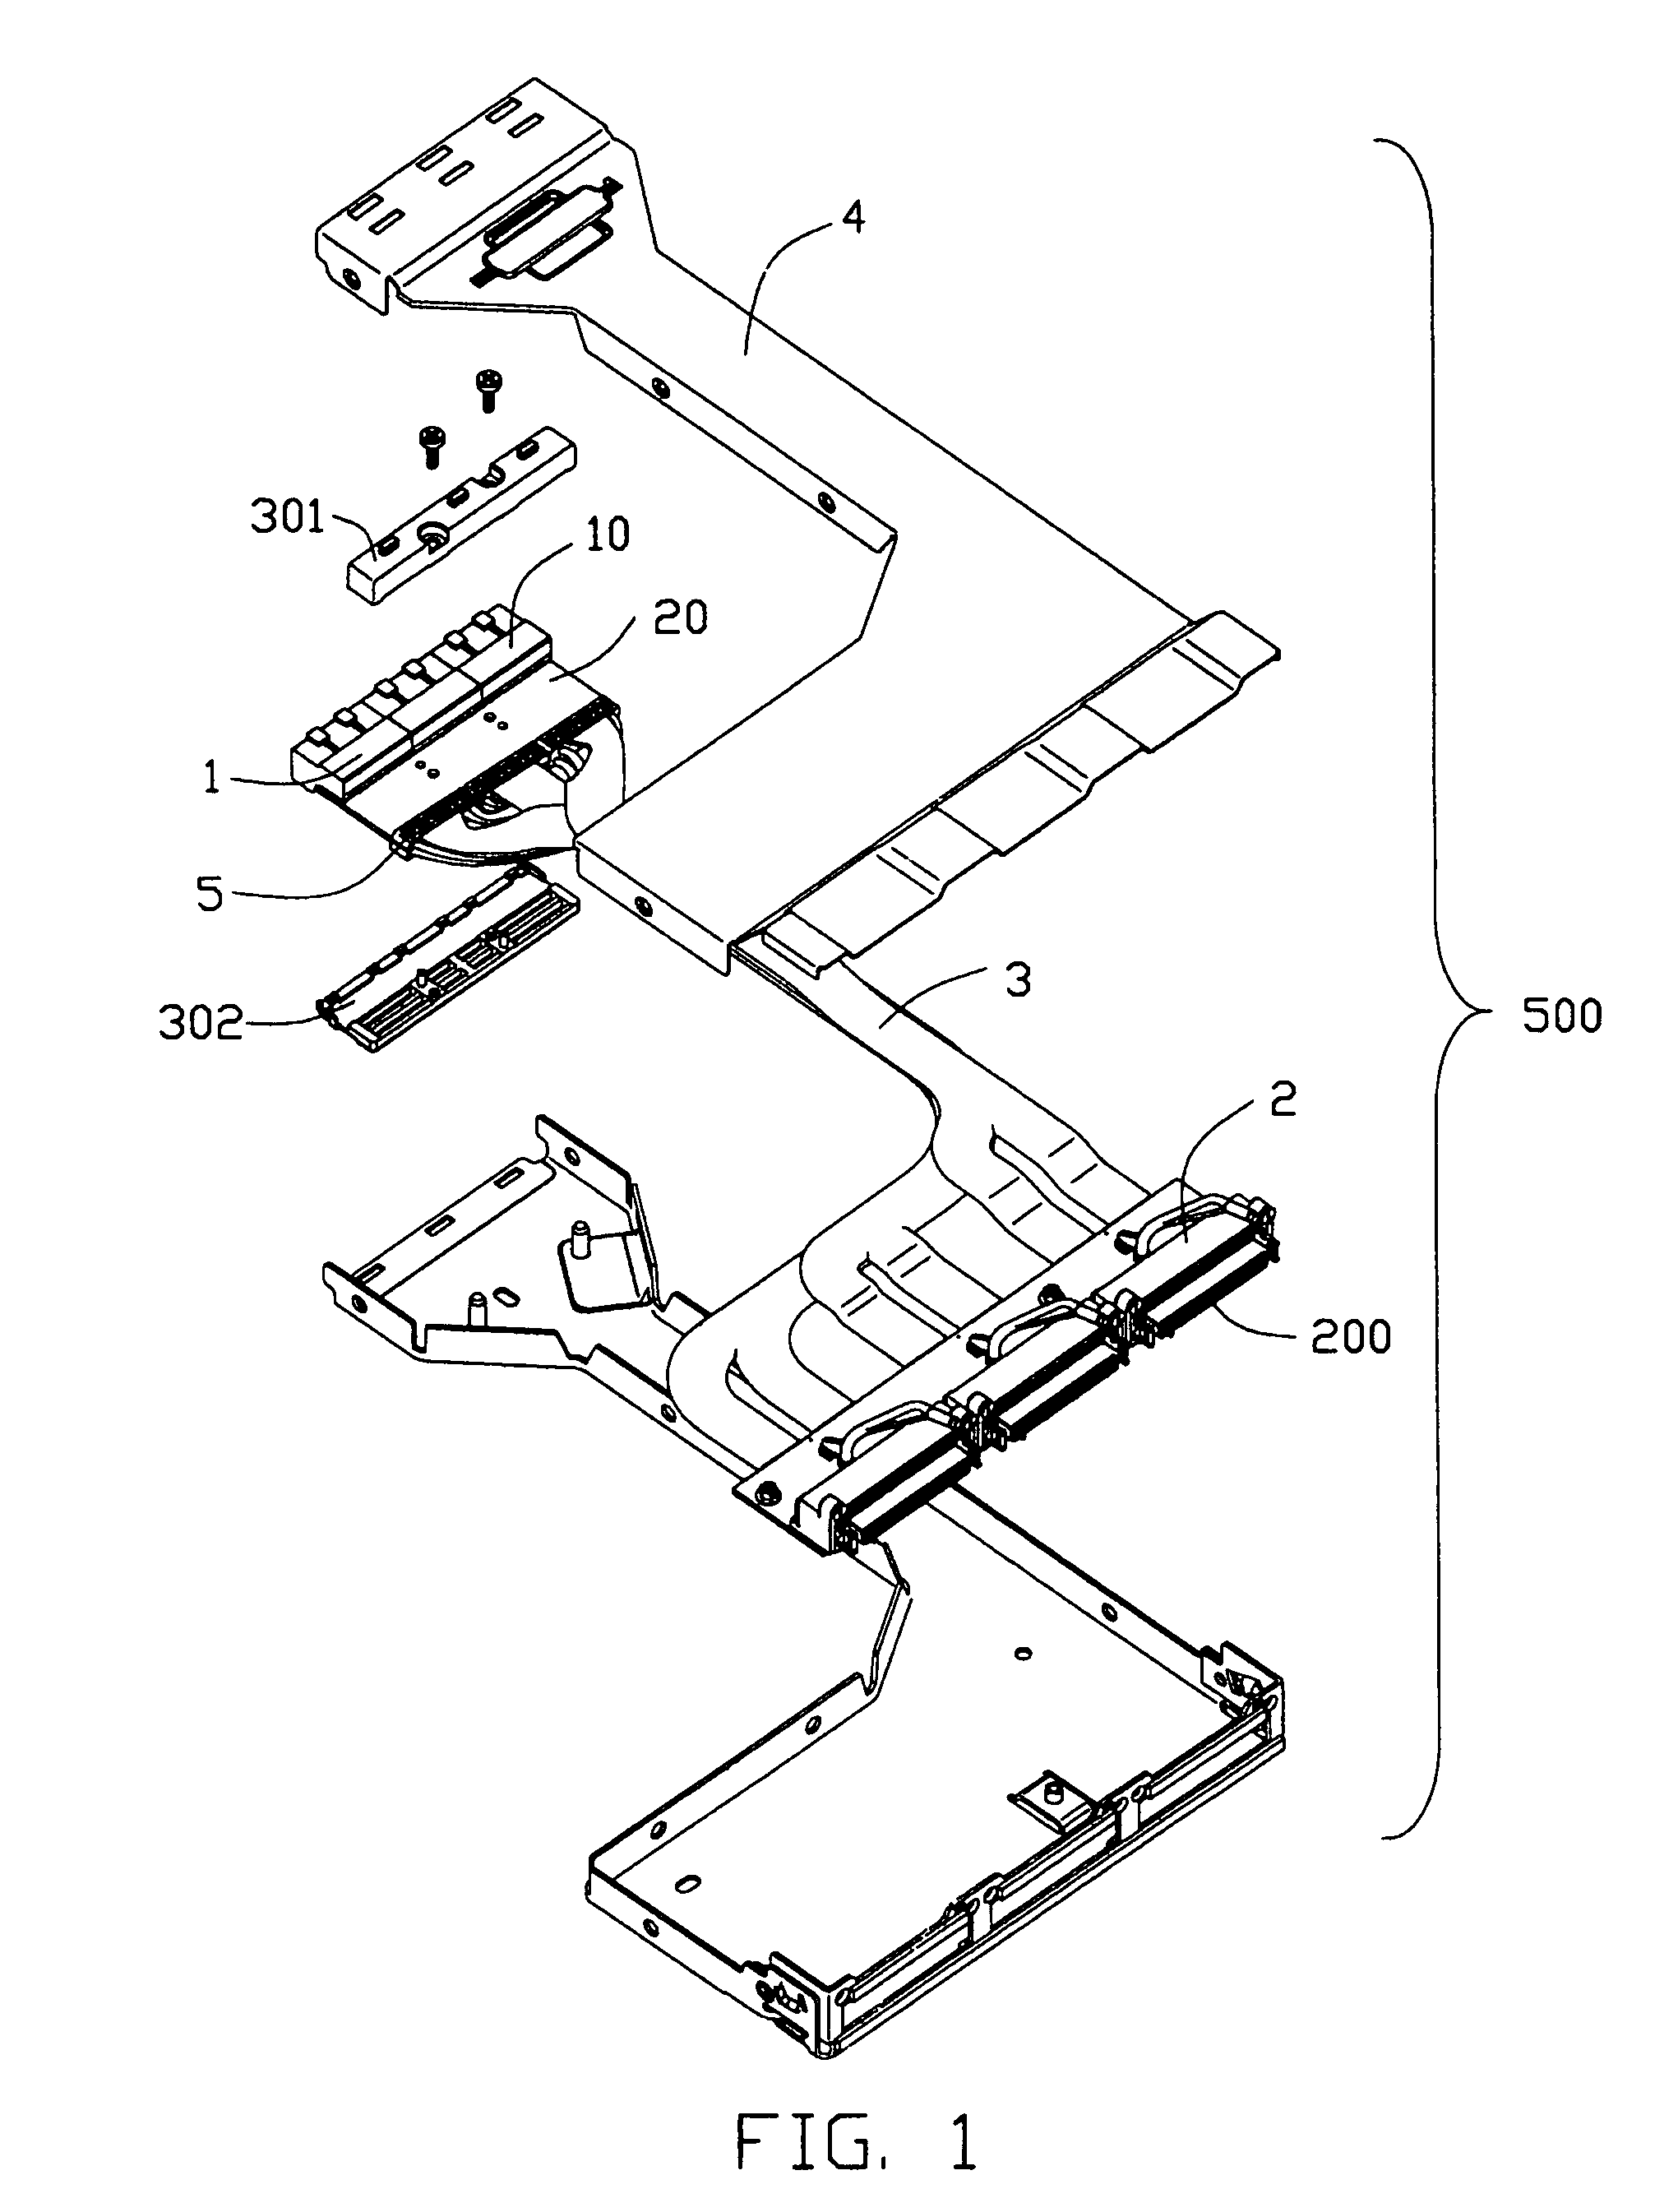 Cable connector assembly with wire spacer